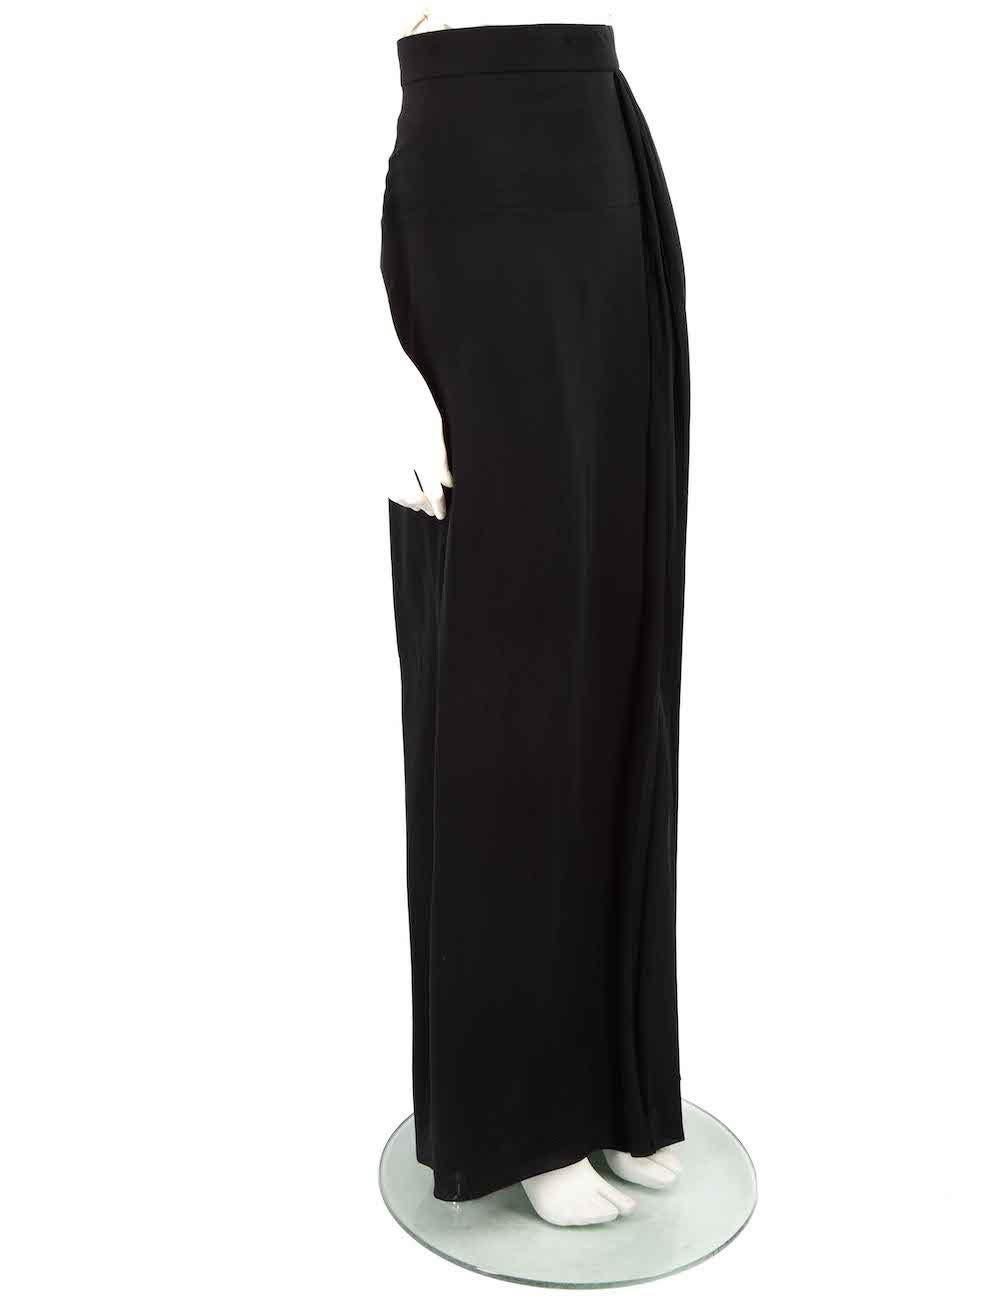 CONDITION is Never worn, with tags. No visible wear to skirt is evident on this new Lanvin designer resale item.
 
 Details
 Black
 Silk
 Skirt
 Maxi
 Pleated panel
 Back zip and hook fastening
 
 Made in Slovakia
 
 Composition
 100% Silk
 Care